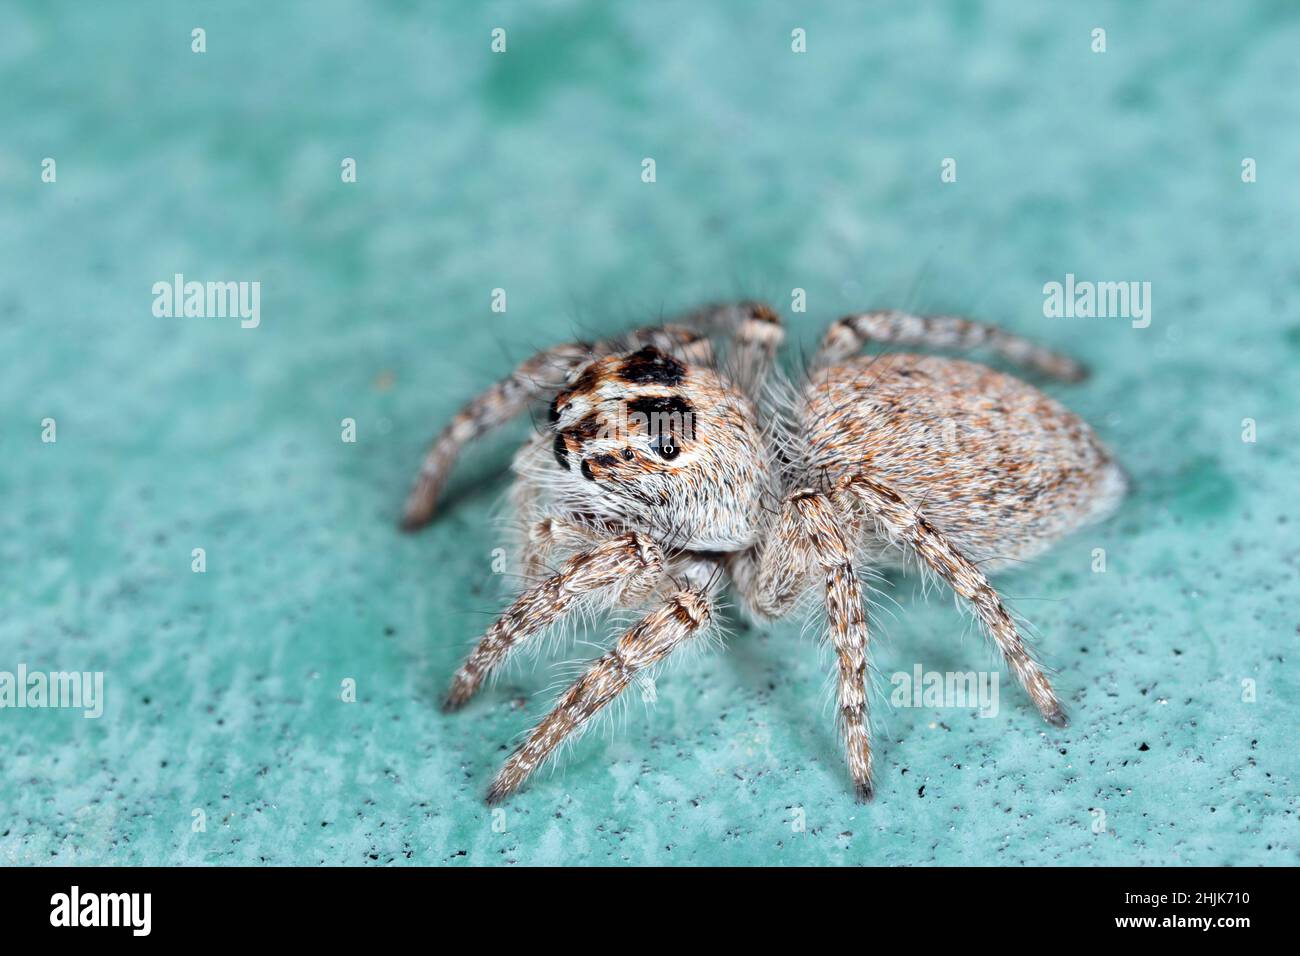 Super macro image of Jumping spider - Salticidae at high magnification.This wildlife spider from Croatia. Take image with macro equipment. Stock Photo